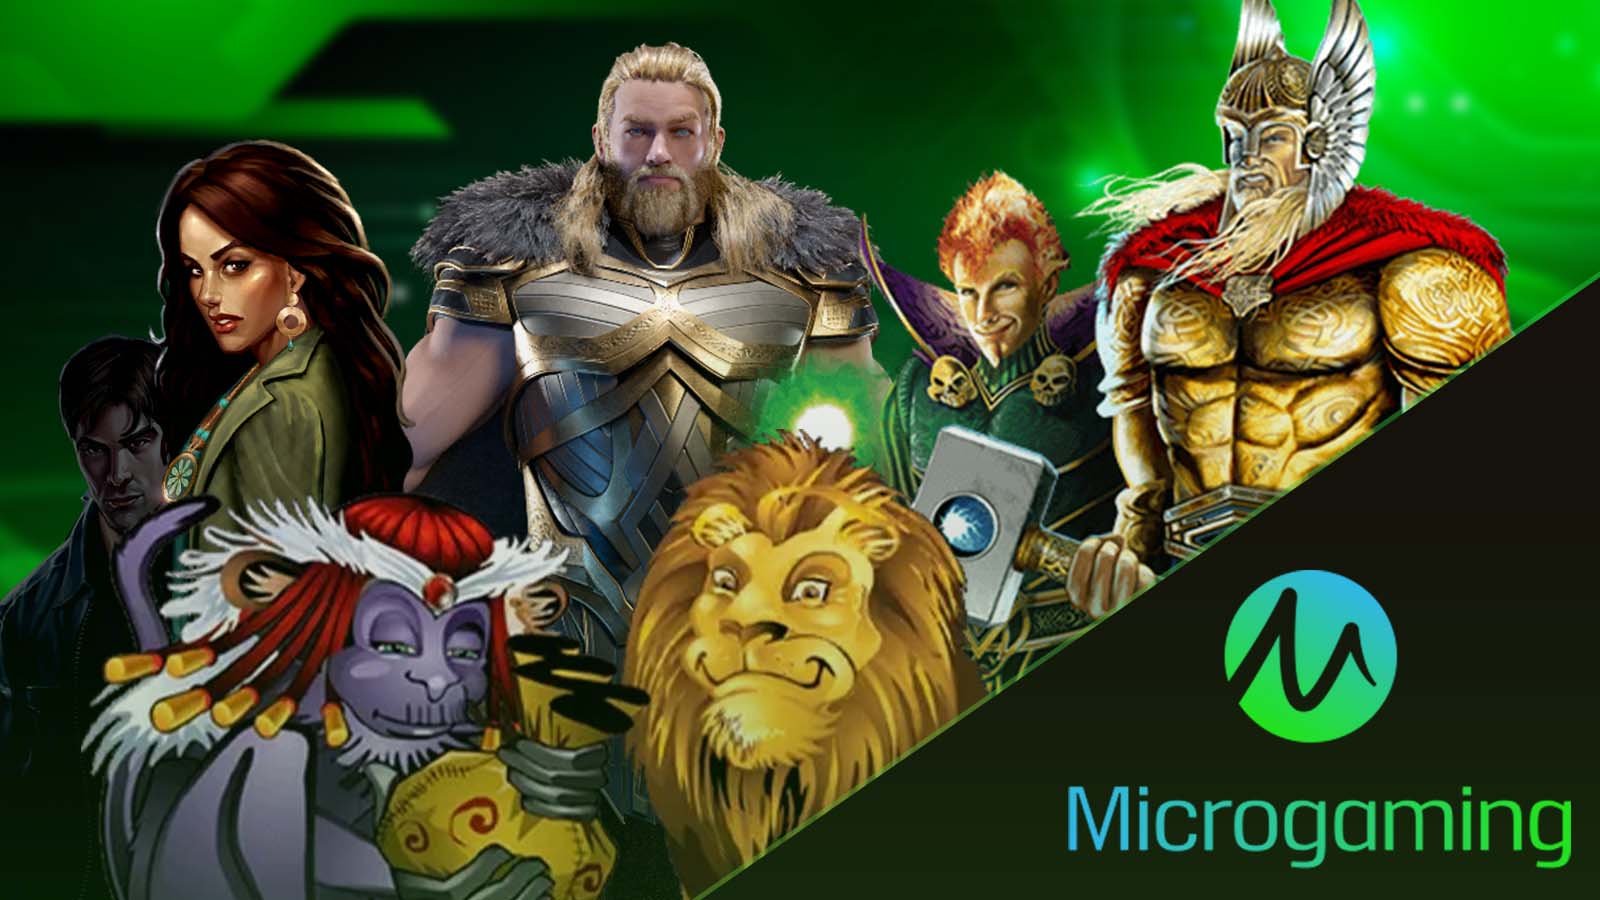 Microgaming - The Top UK Game Provider